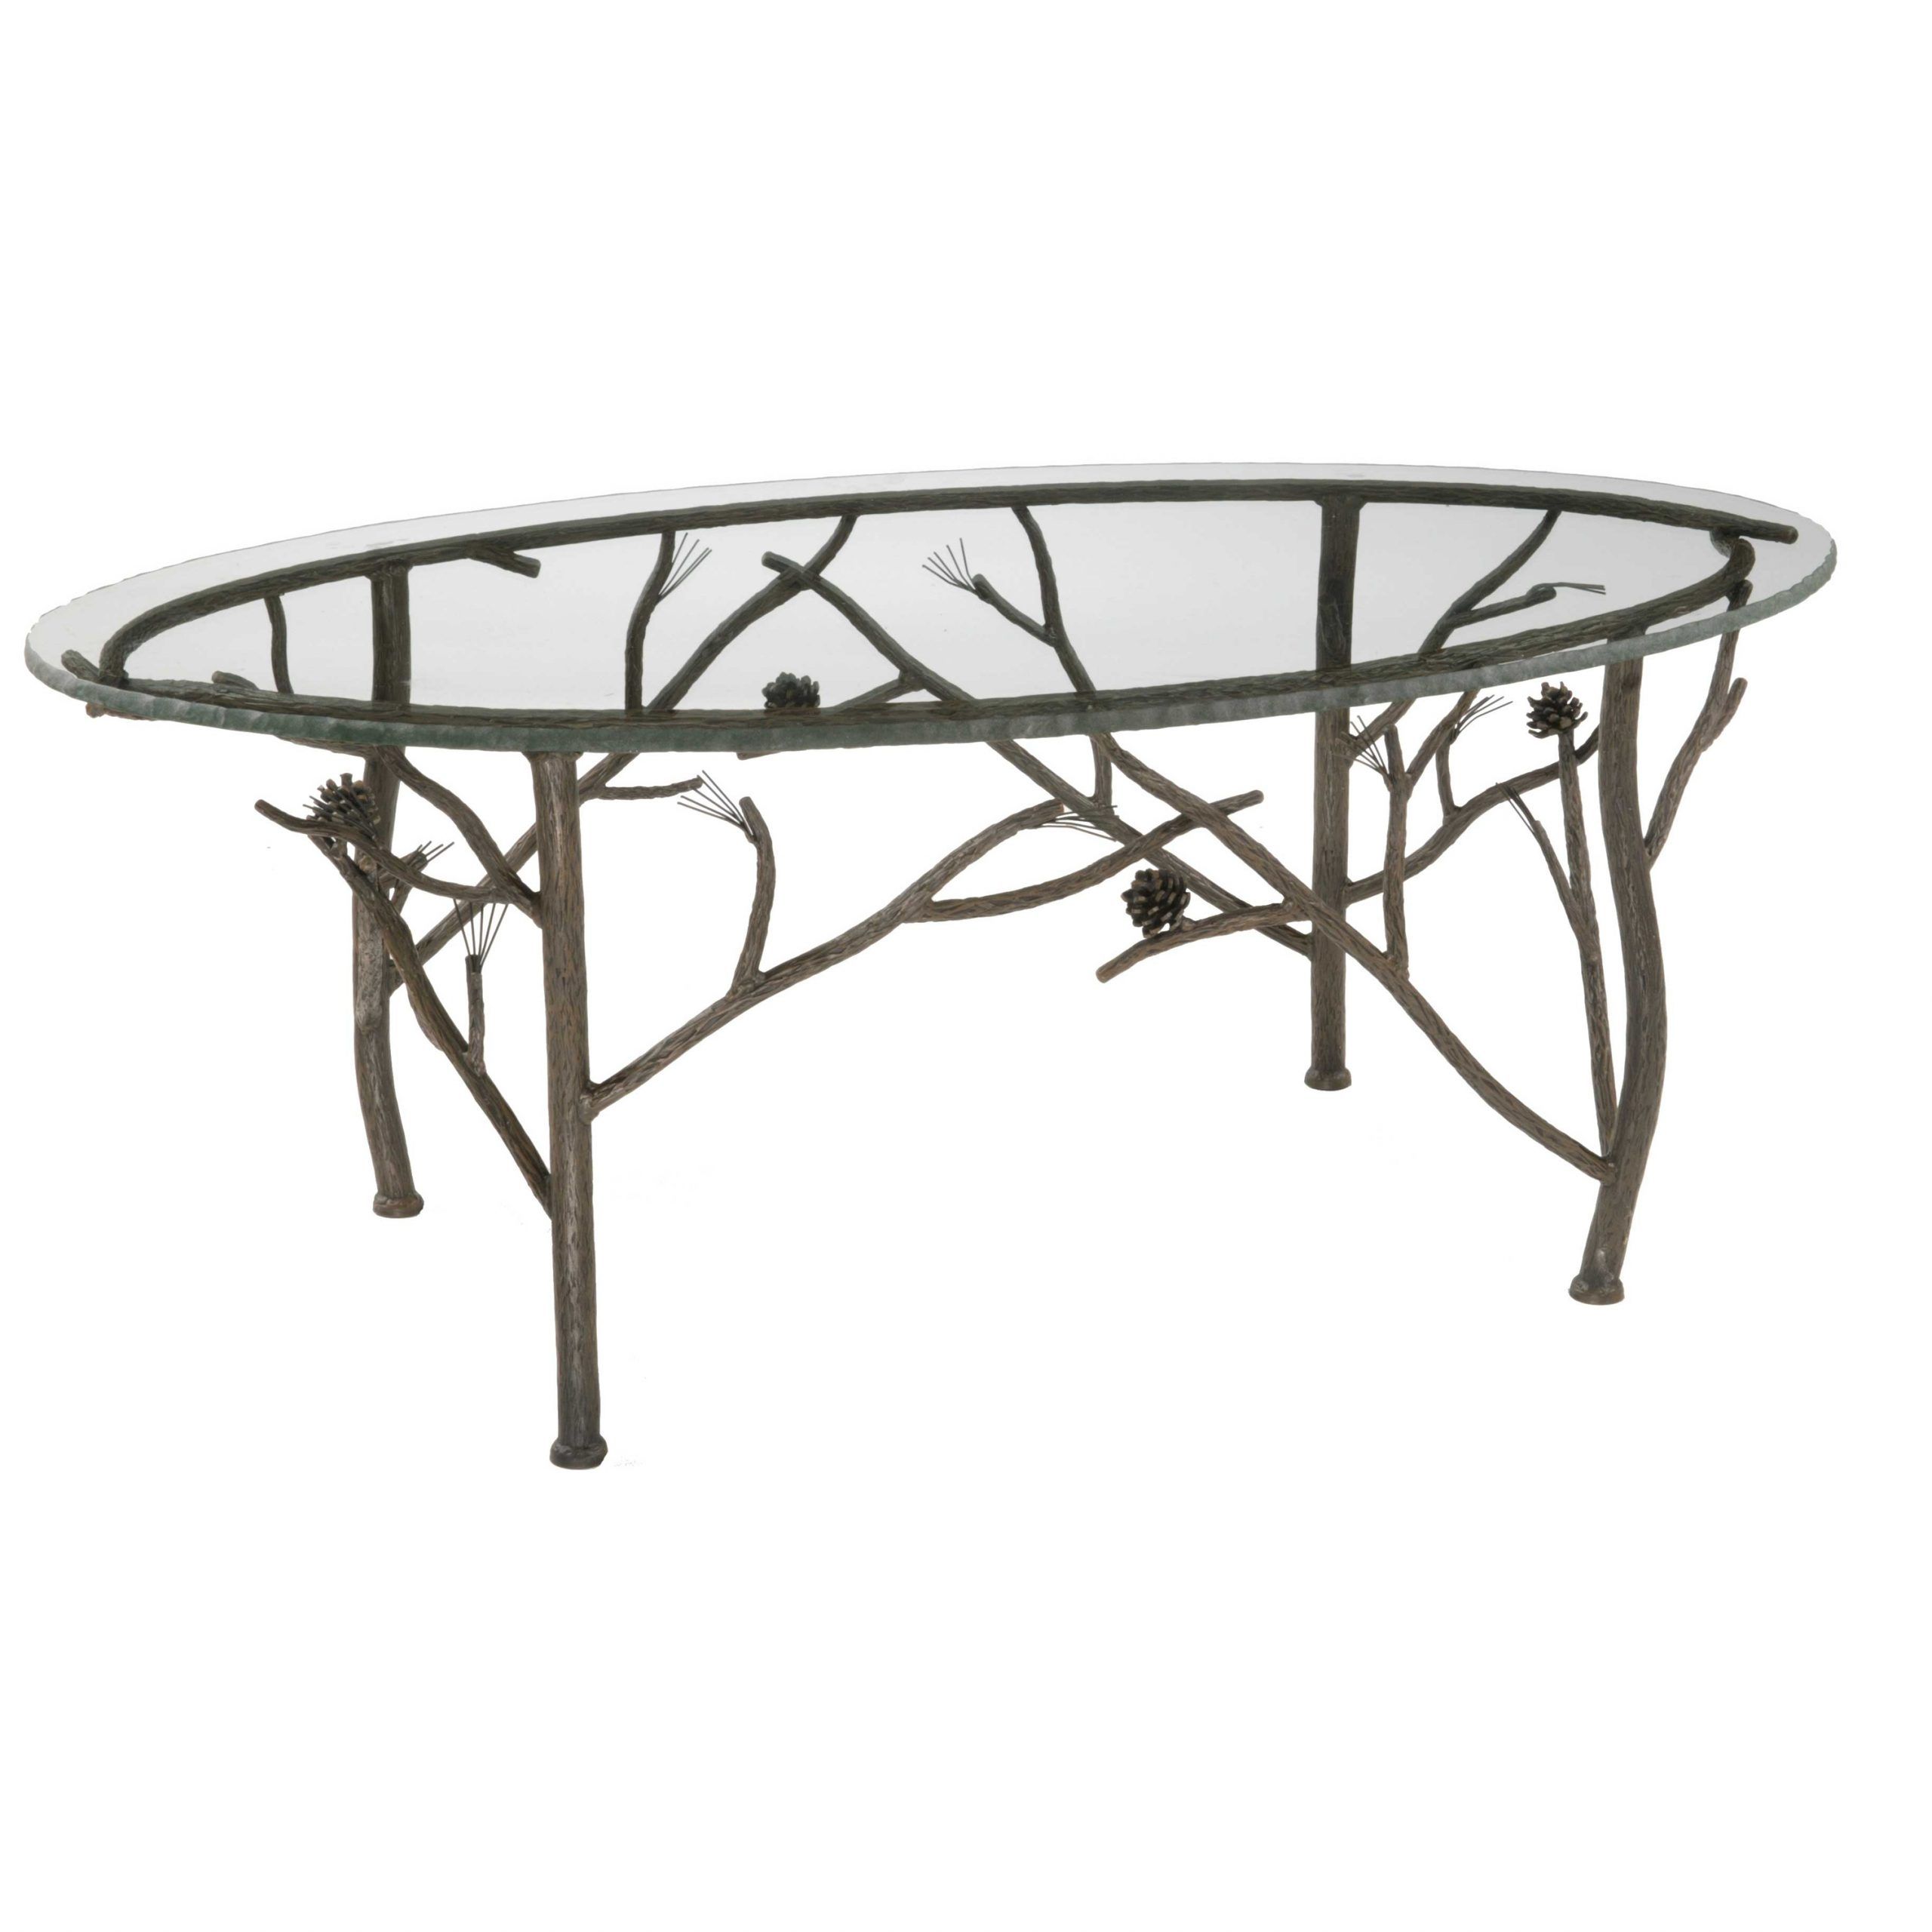 Rustic Pine Oval Coffee Table Inside Wrought Iron Cocktail Tables (View 14 of 15)